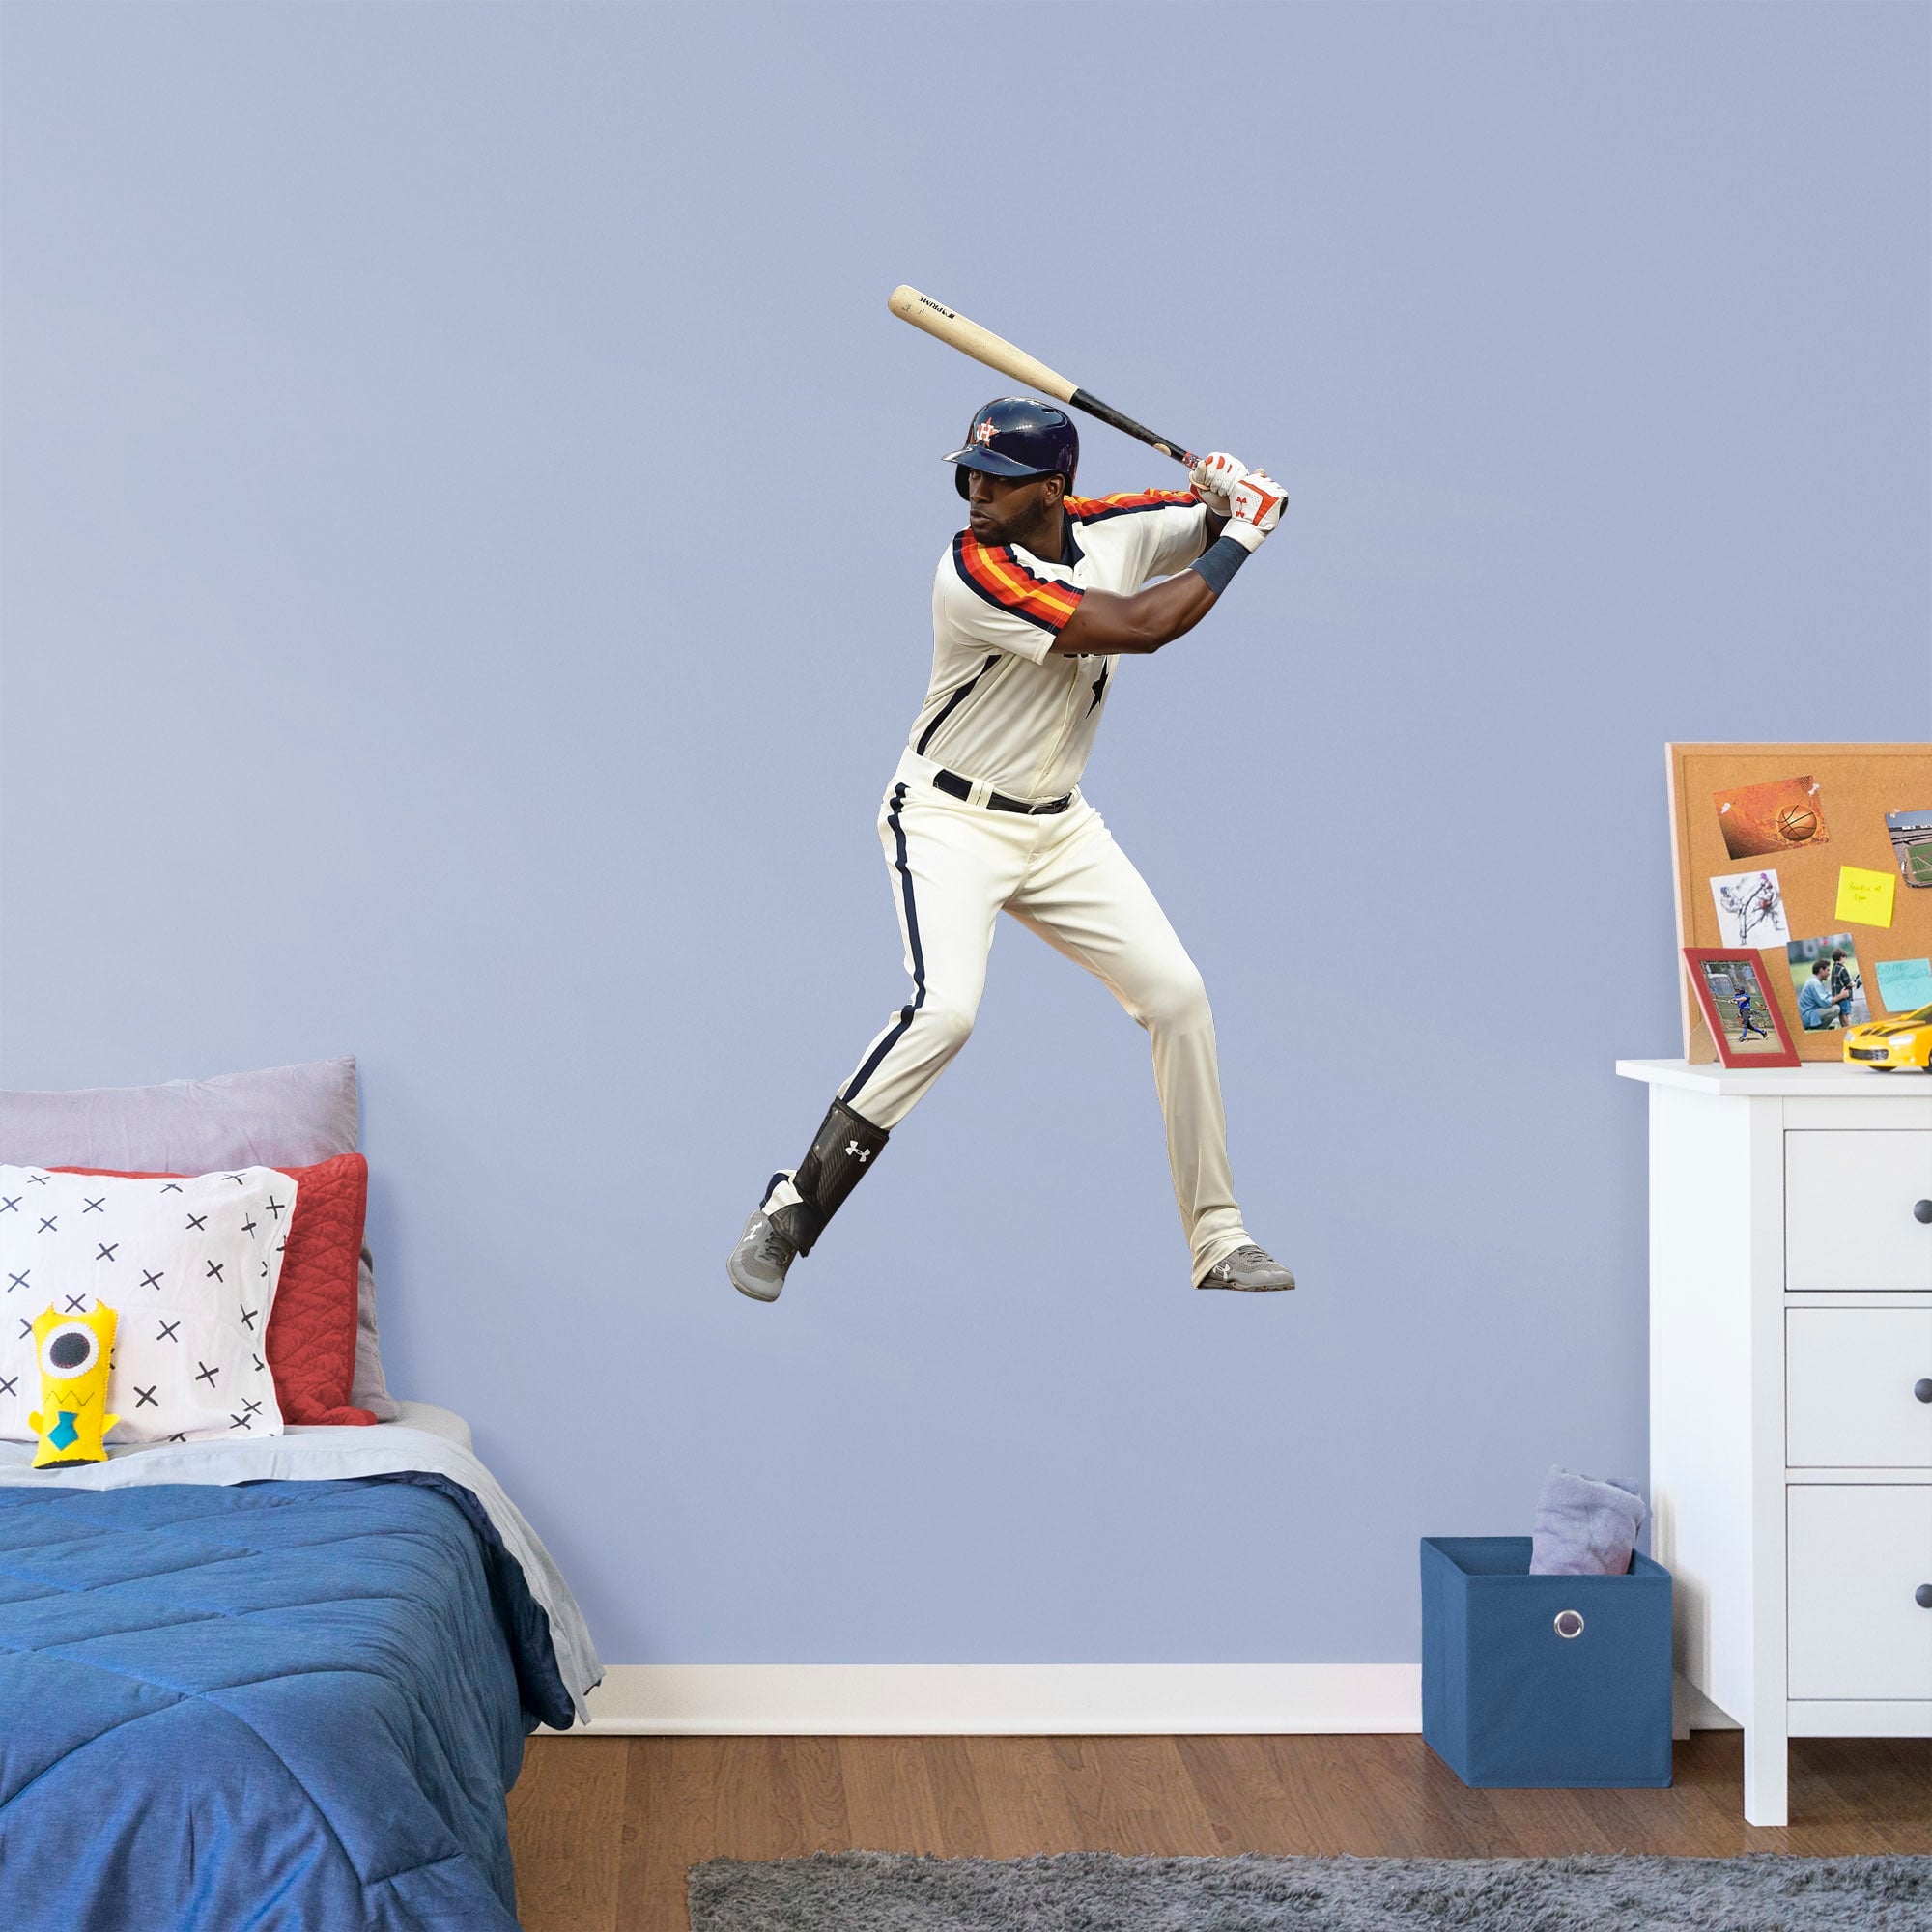 Yordan Alvarez for Houston Astros - Officially Licensed MLB Removable Wall Decal Giant Athlete + 2 Decals (29"W x 51"H) by Fathe